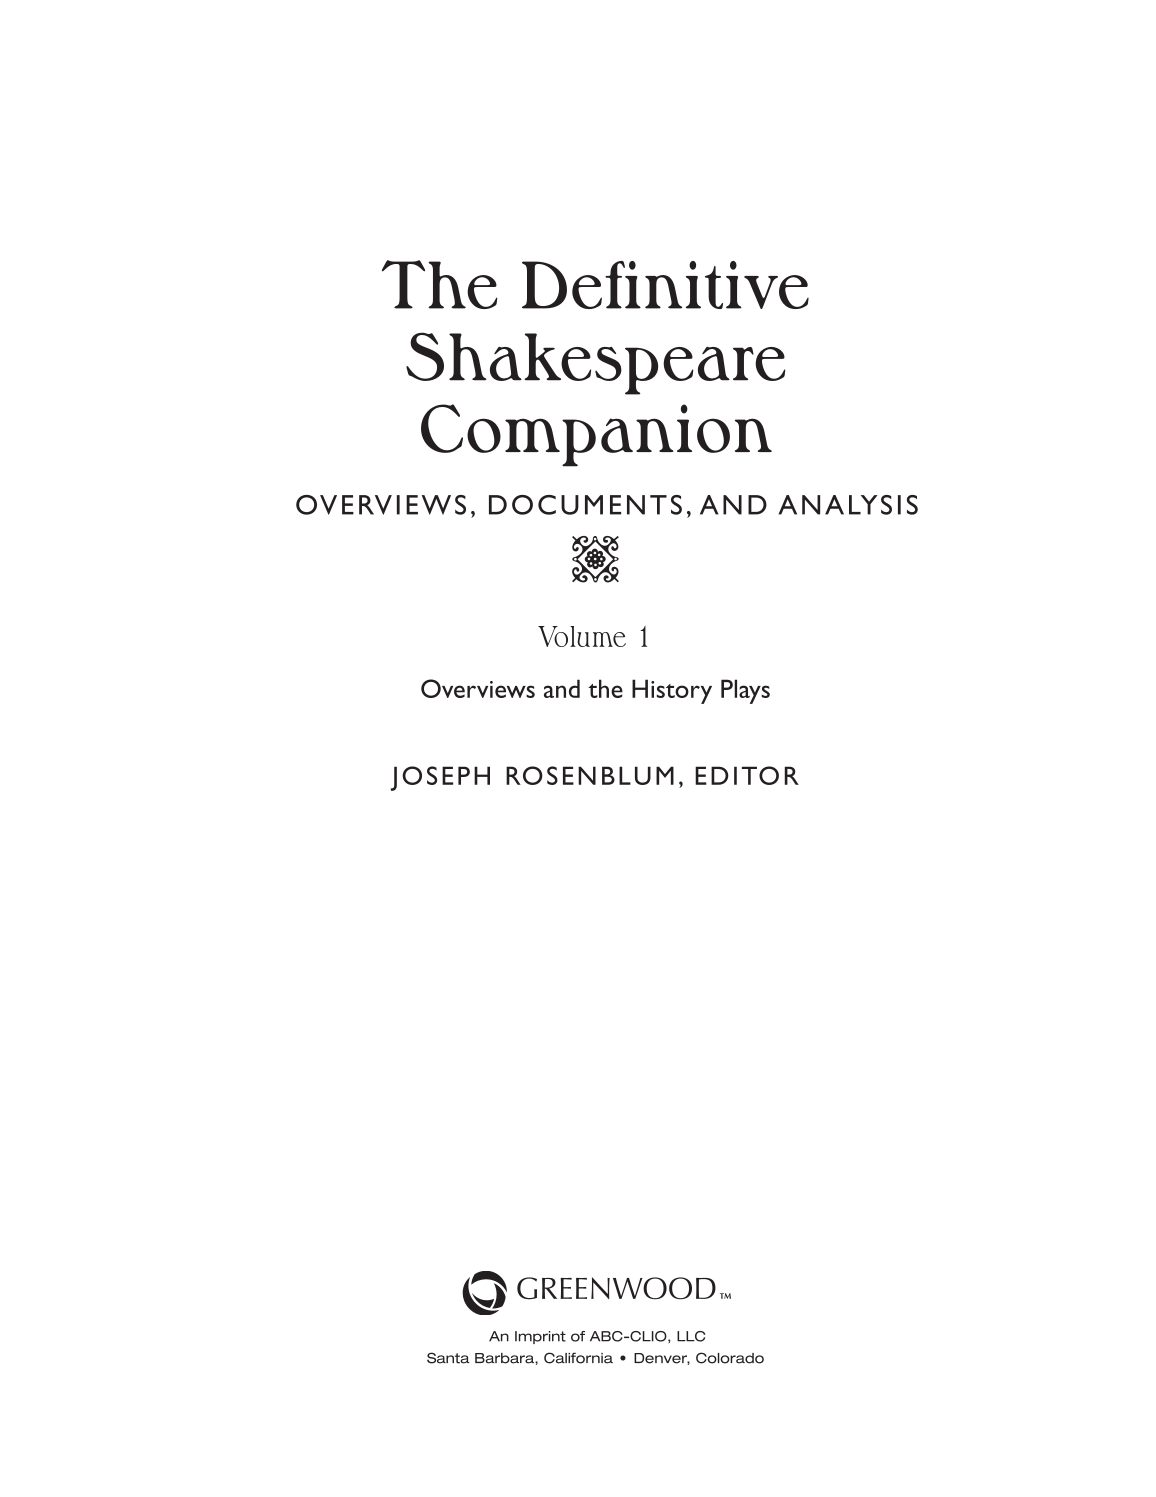 The Definitive Shakespeare Companion: Overviews, Documents, and Analysis [4 volumes] page iii